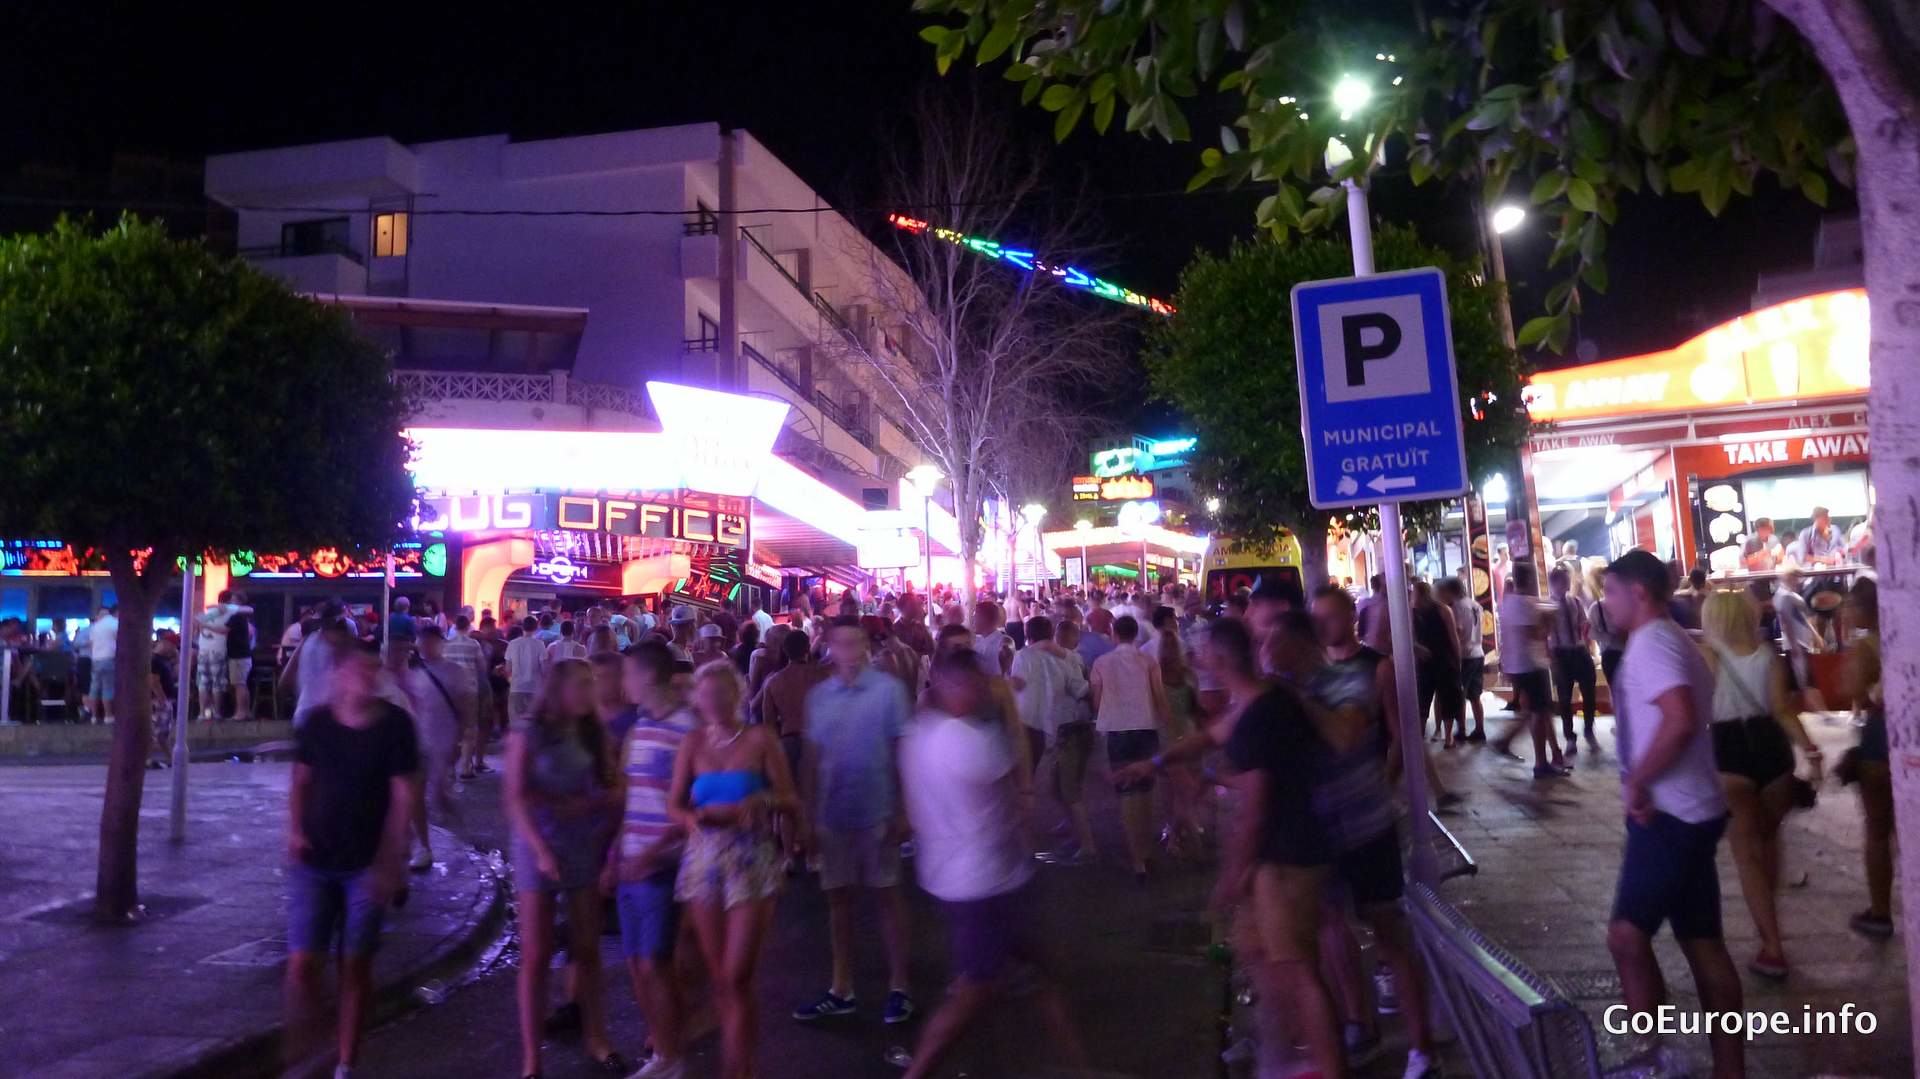 The Strip - main street of the clubs and bars.